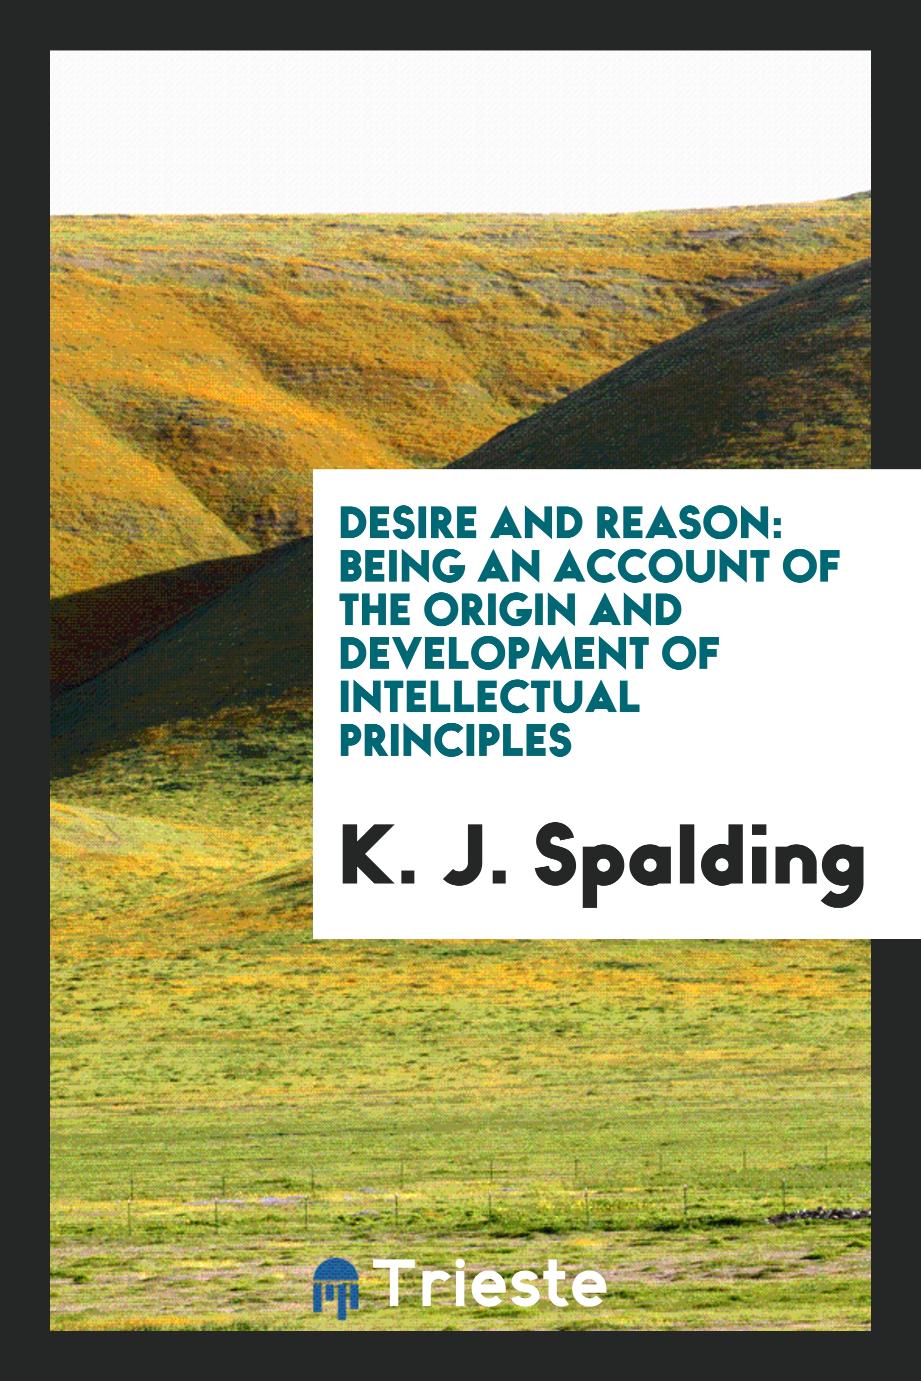 Desire and reason: being an account of the origin and development of intellectual principles